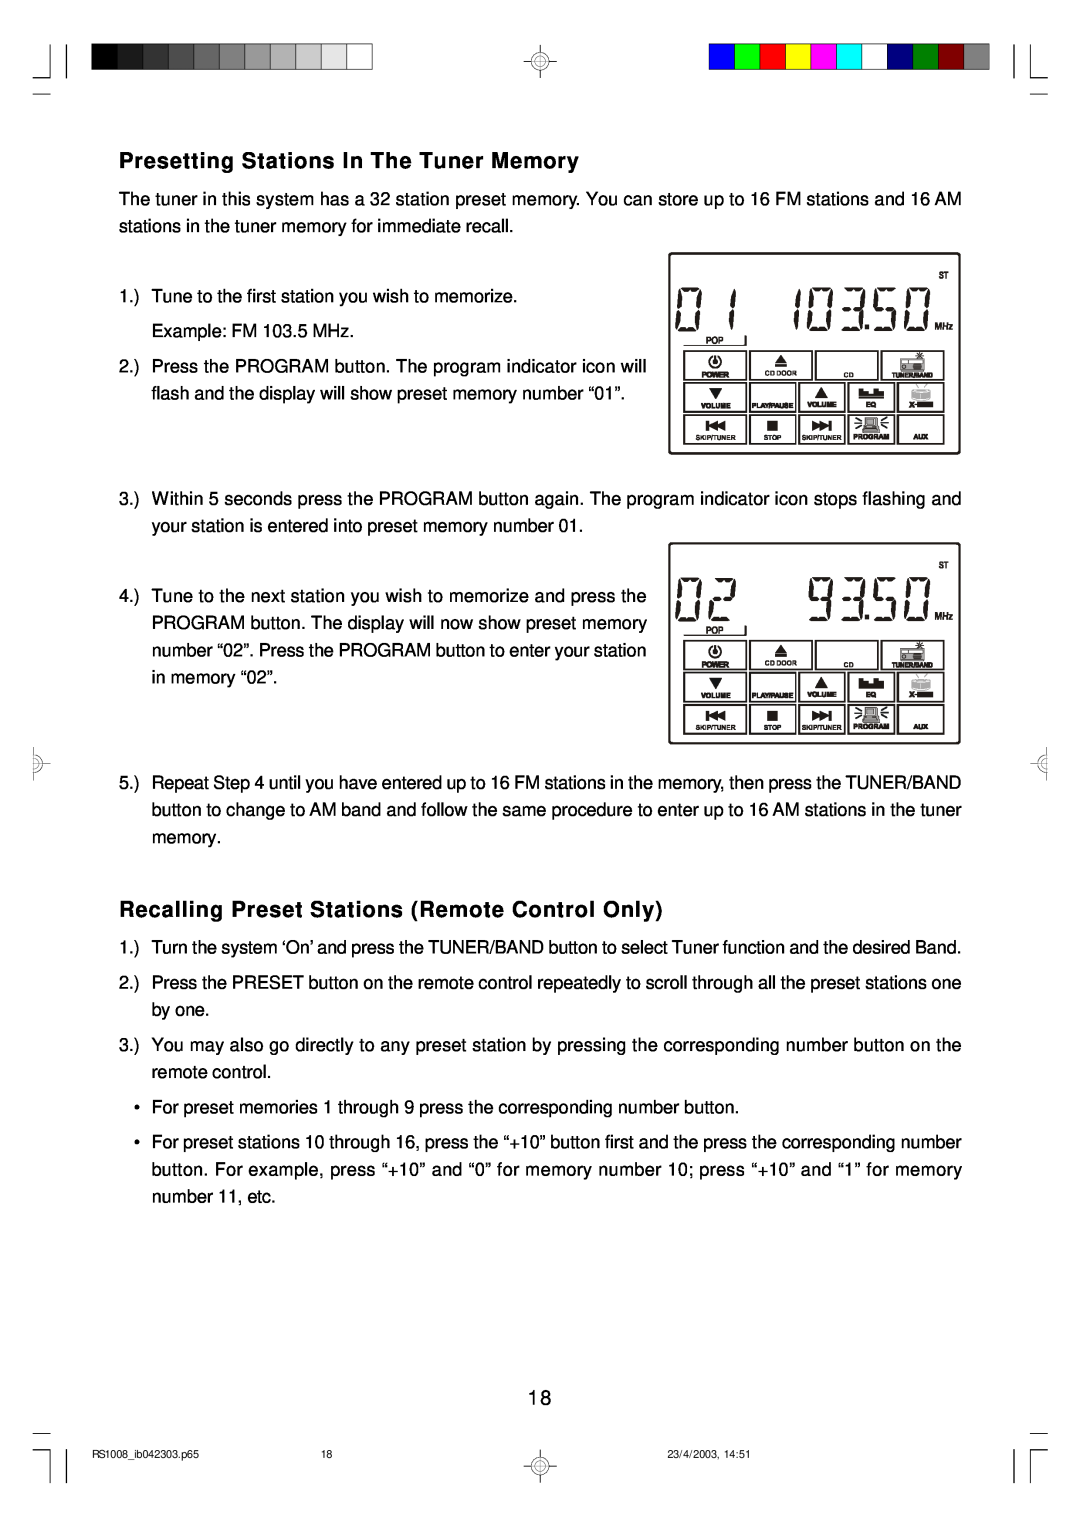 Emerson RS1008 owner manual Presetting Stations In The Tuner Memory, Recalling Preset Stations Remote Control Only 